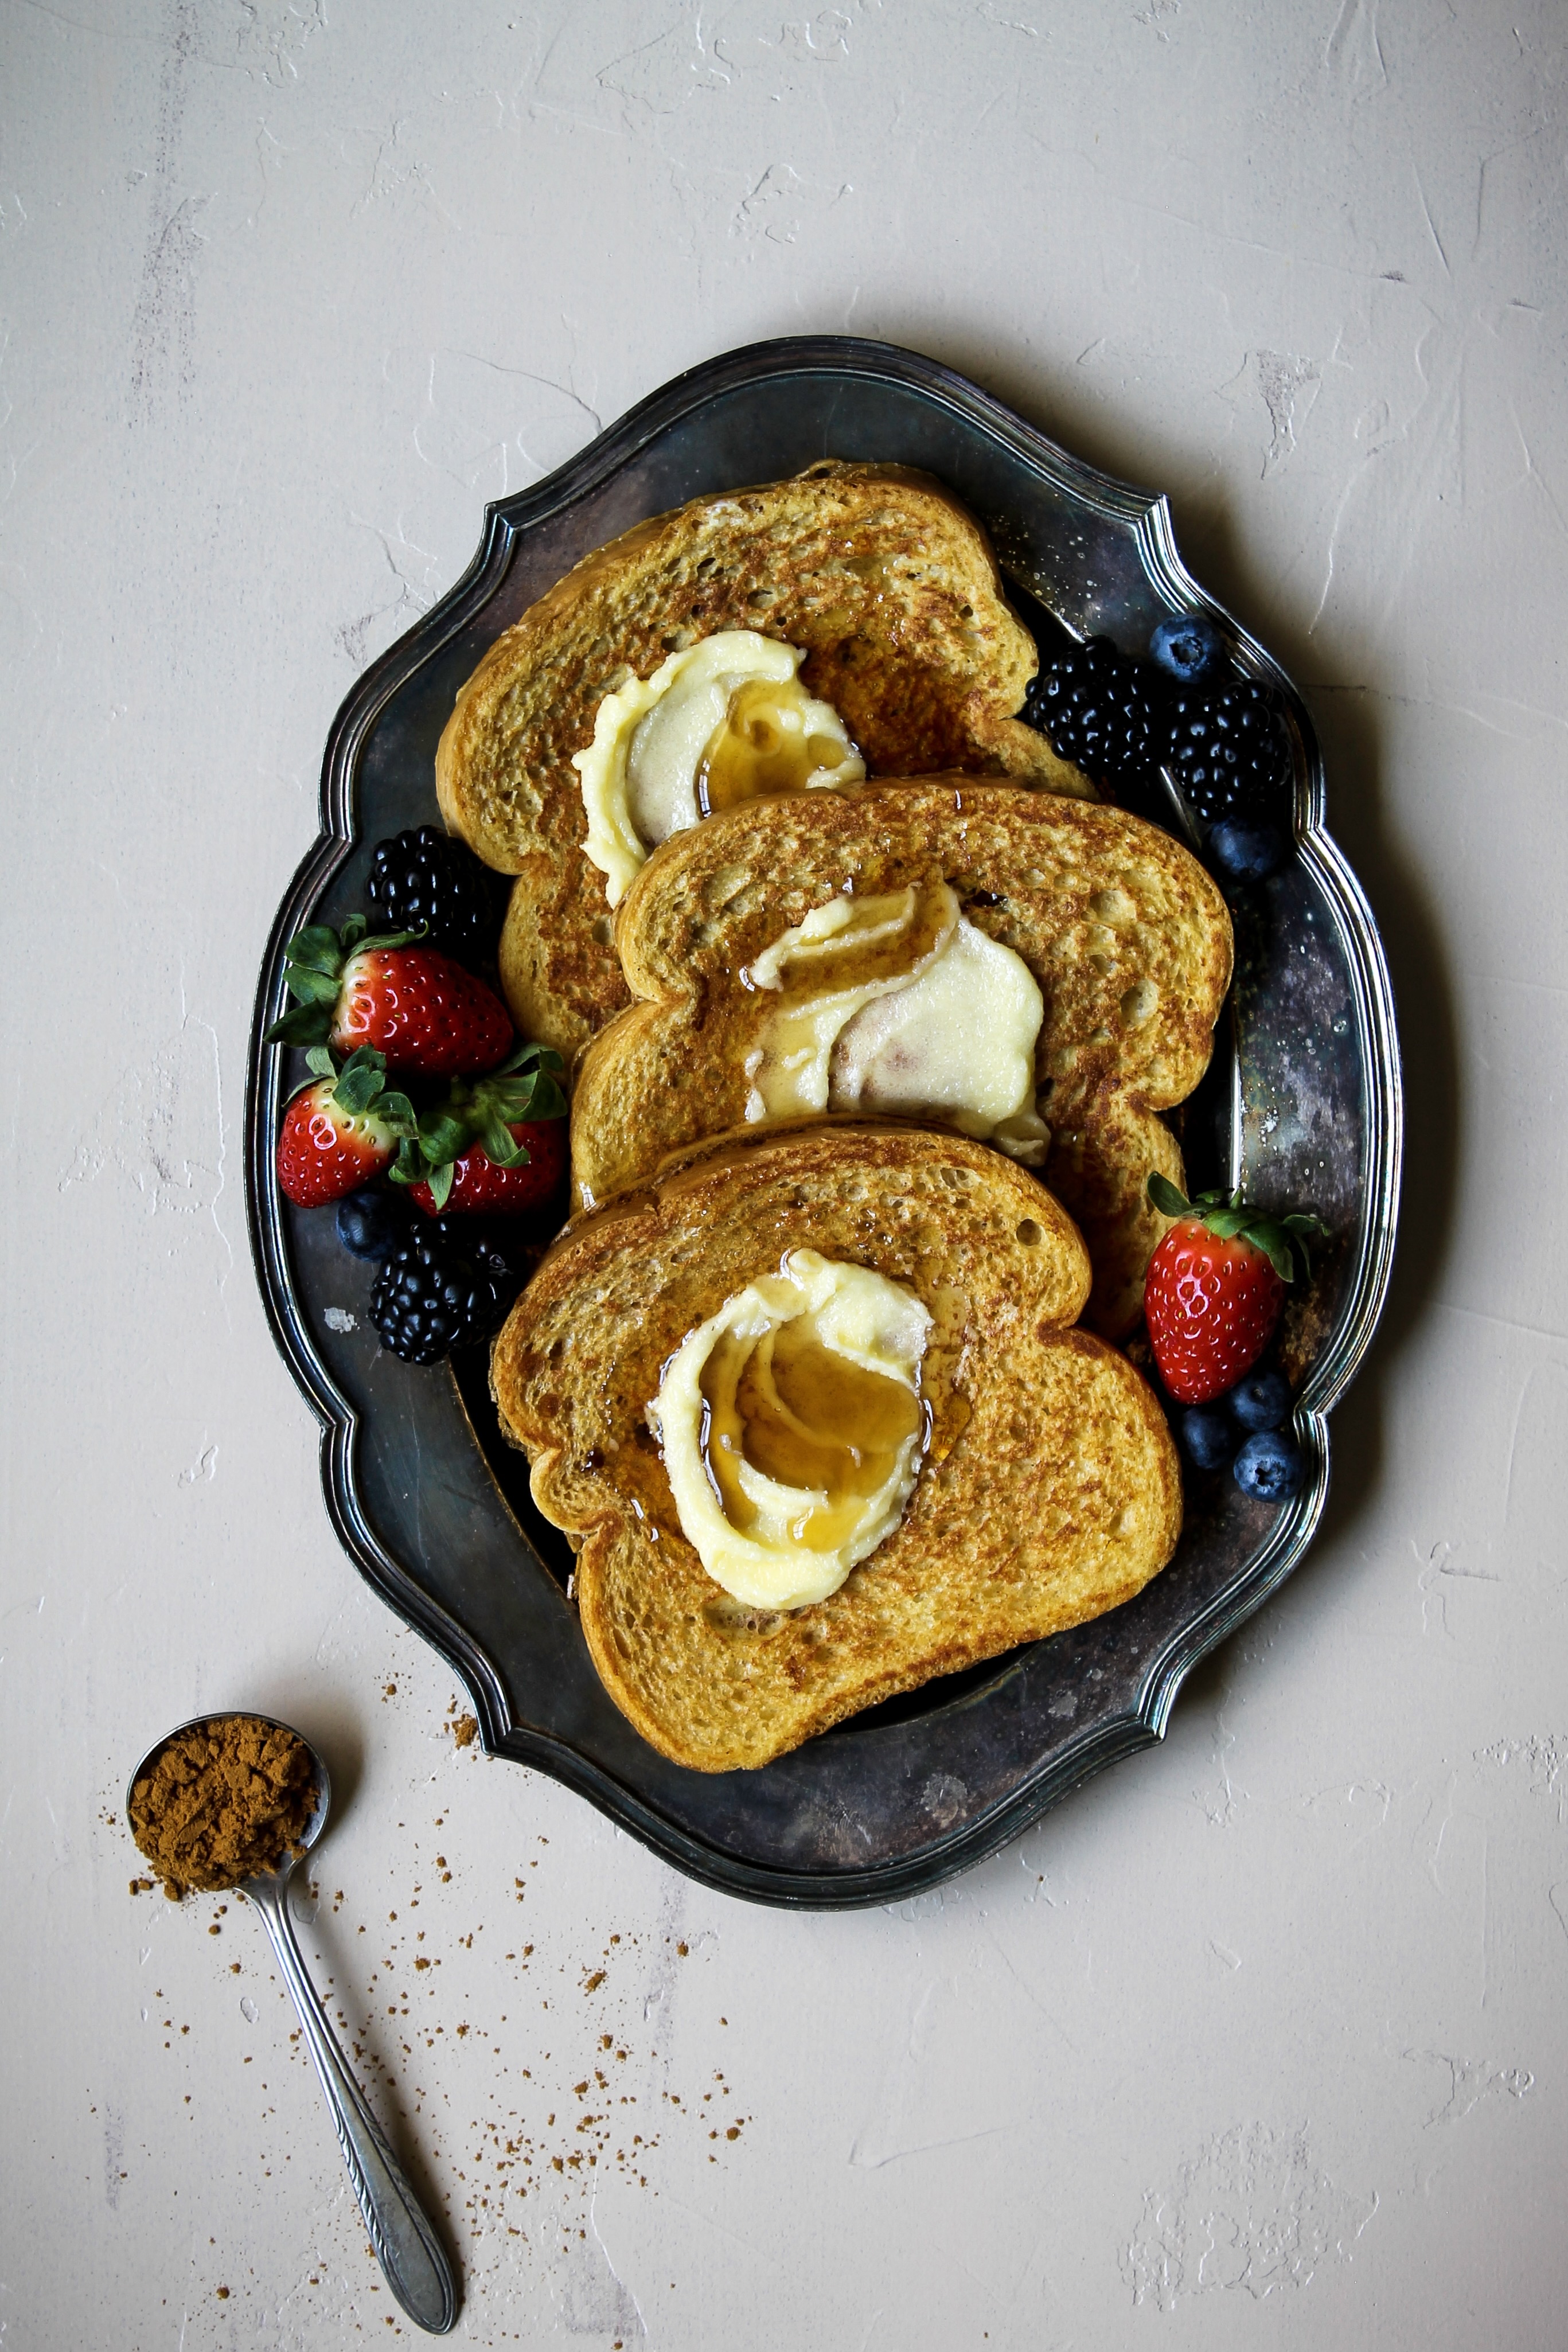 Oval metal platter with 3 slices of French toast with butter, syrup and fresh berries.